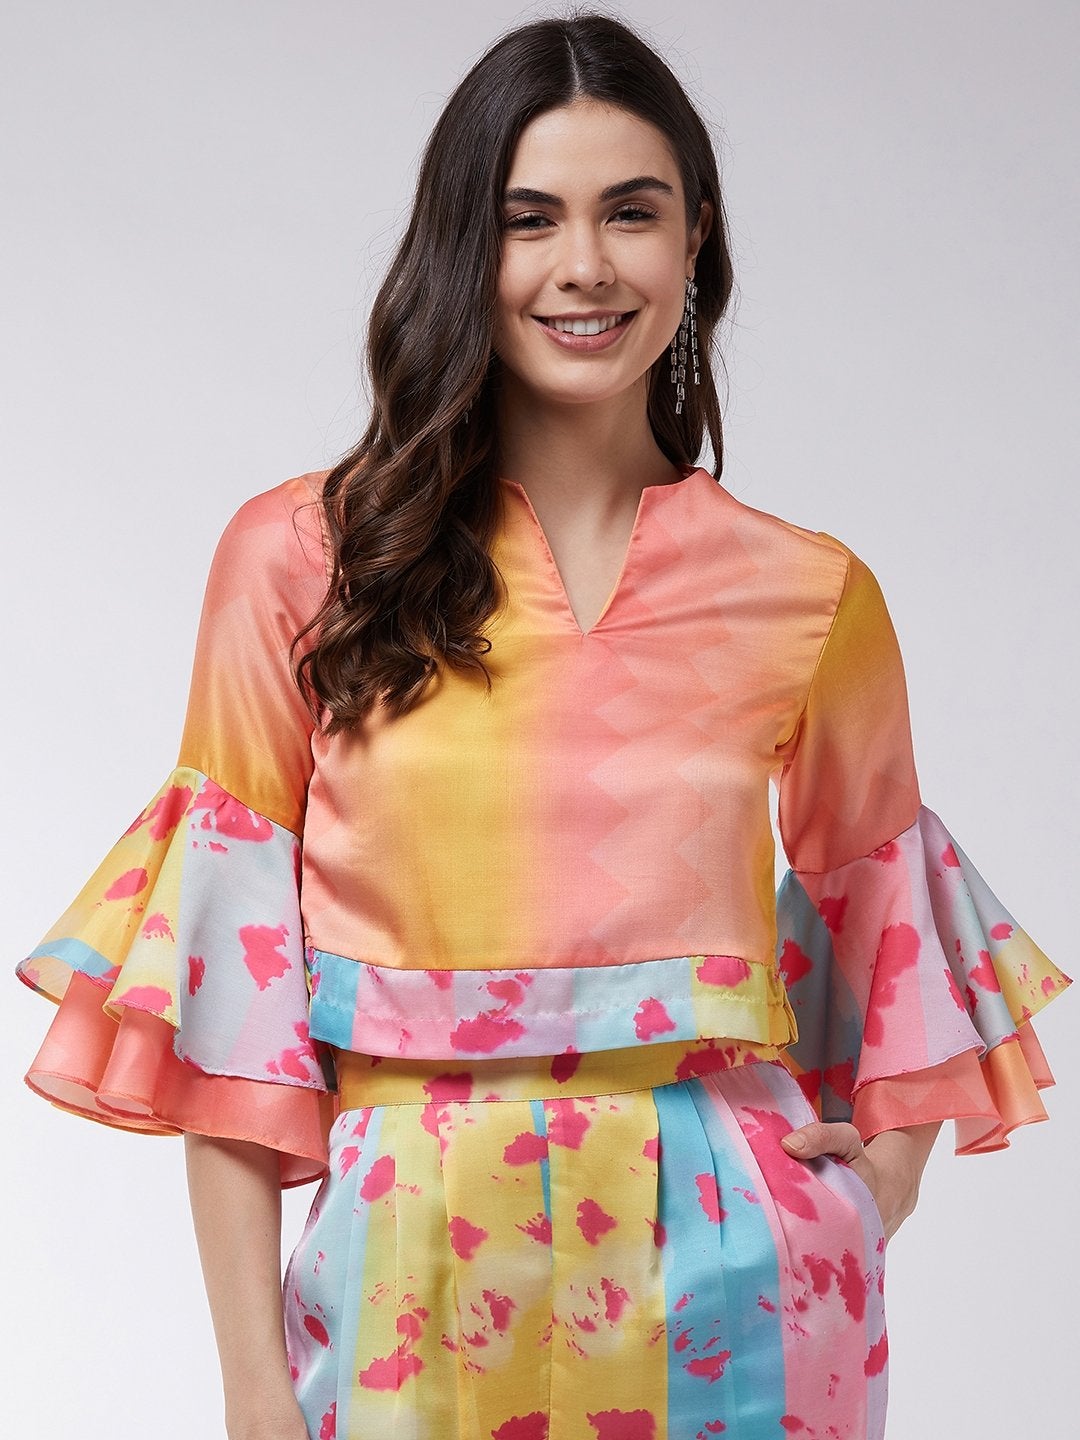 Women's Candy Inspired Digital Printed Bell Sleeves Top - Pannkh